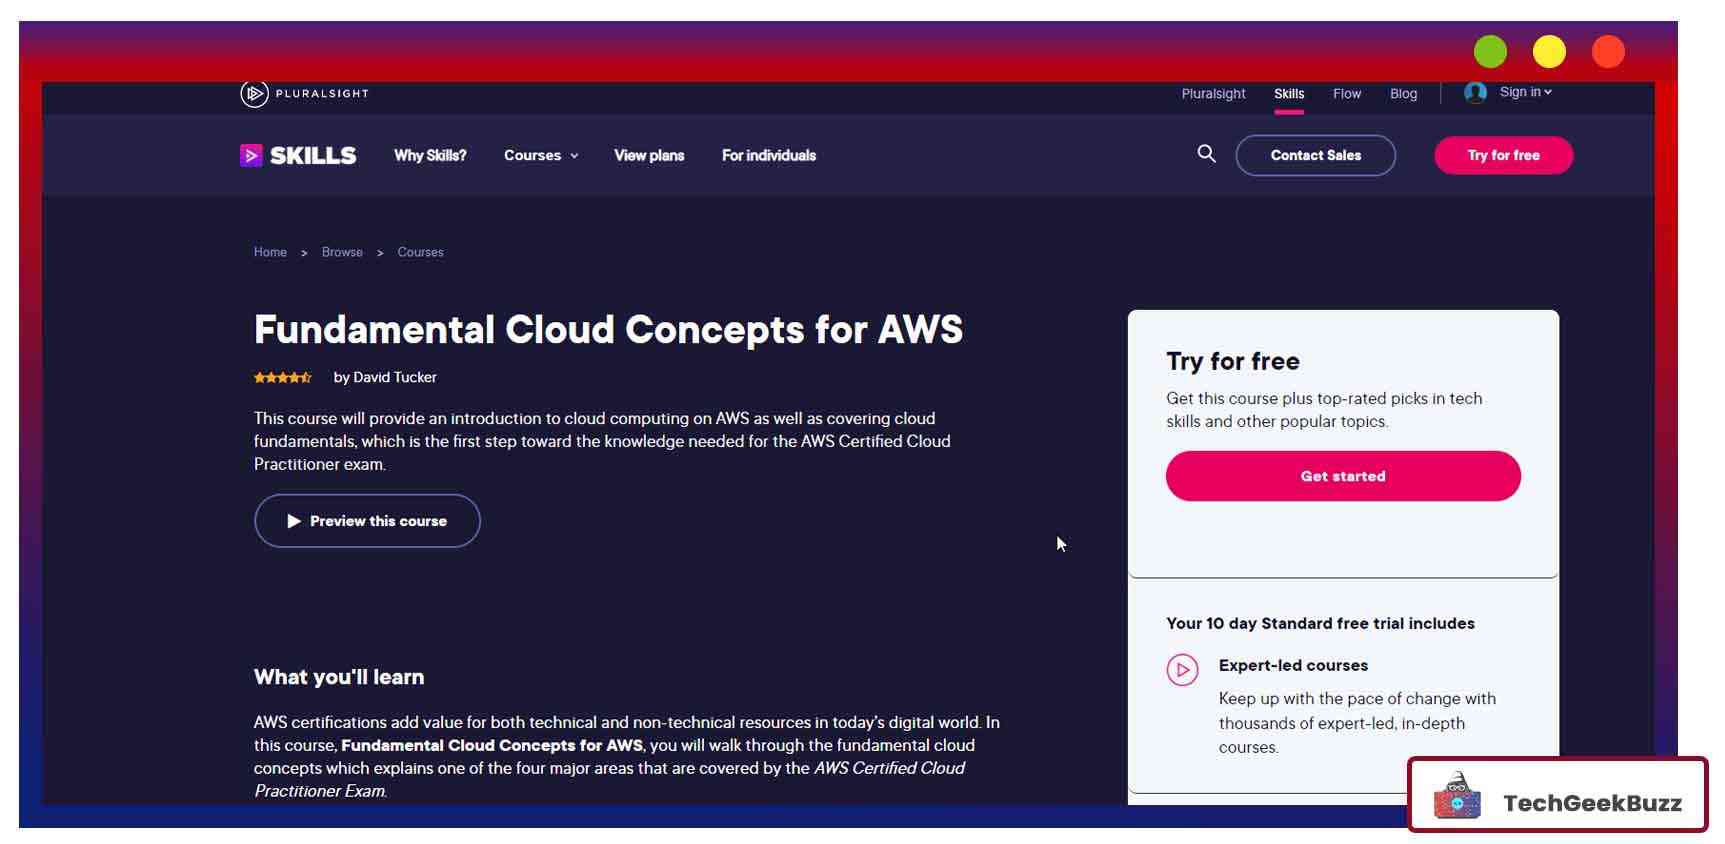 Fundamental Cloud Concepts for AWS